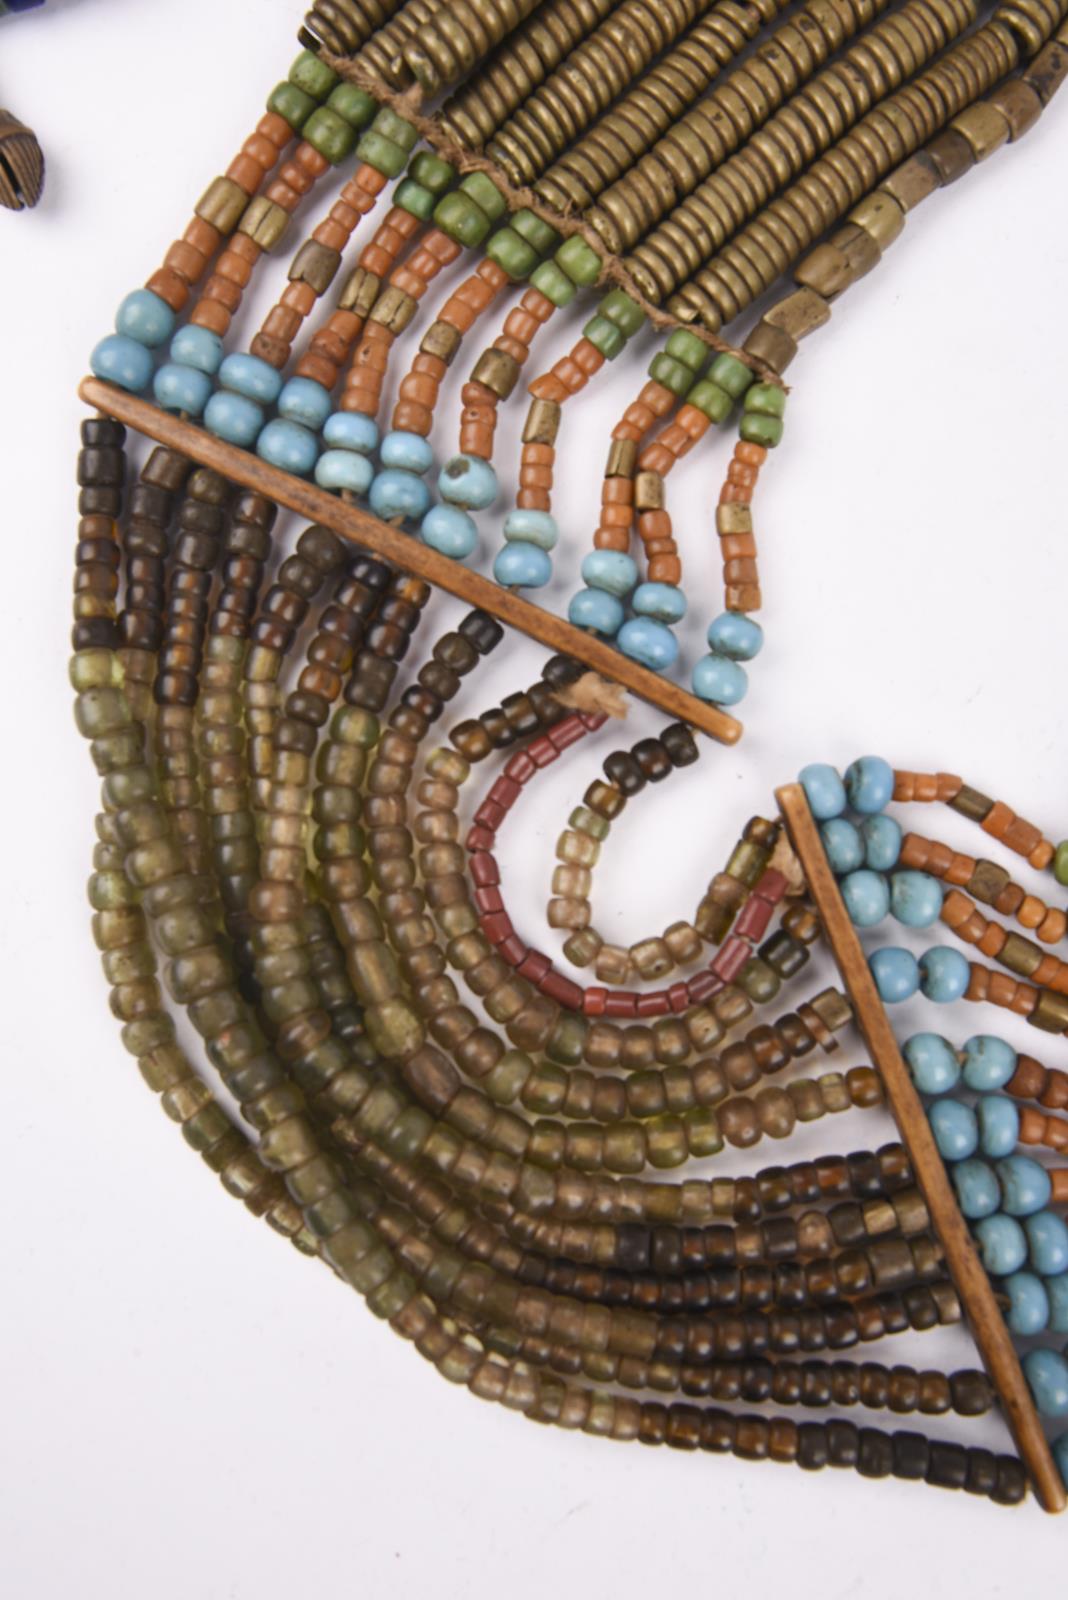 Three Naga necklaces Nagaland coloured glass beads, brass, shell and fibre, one hung with brass - Image 3 of 5